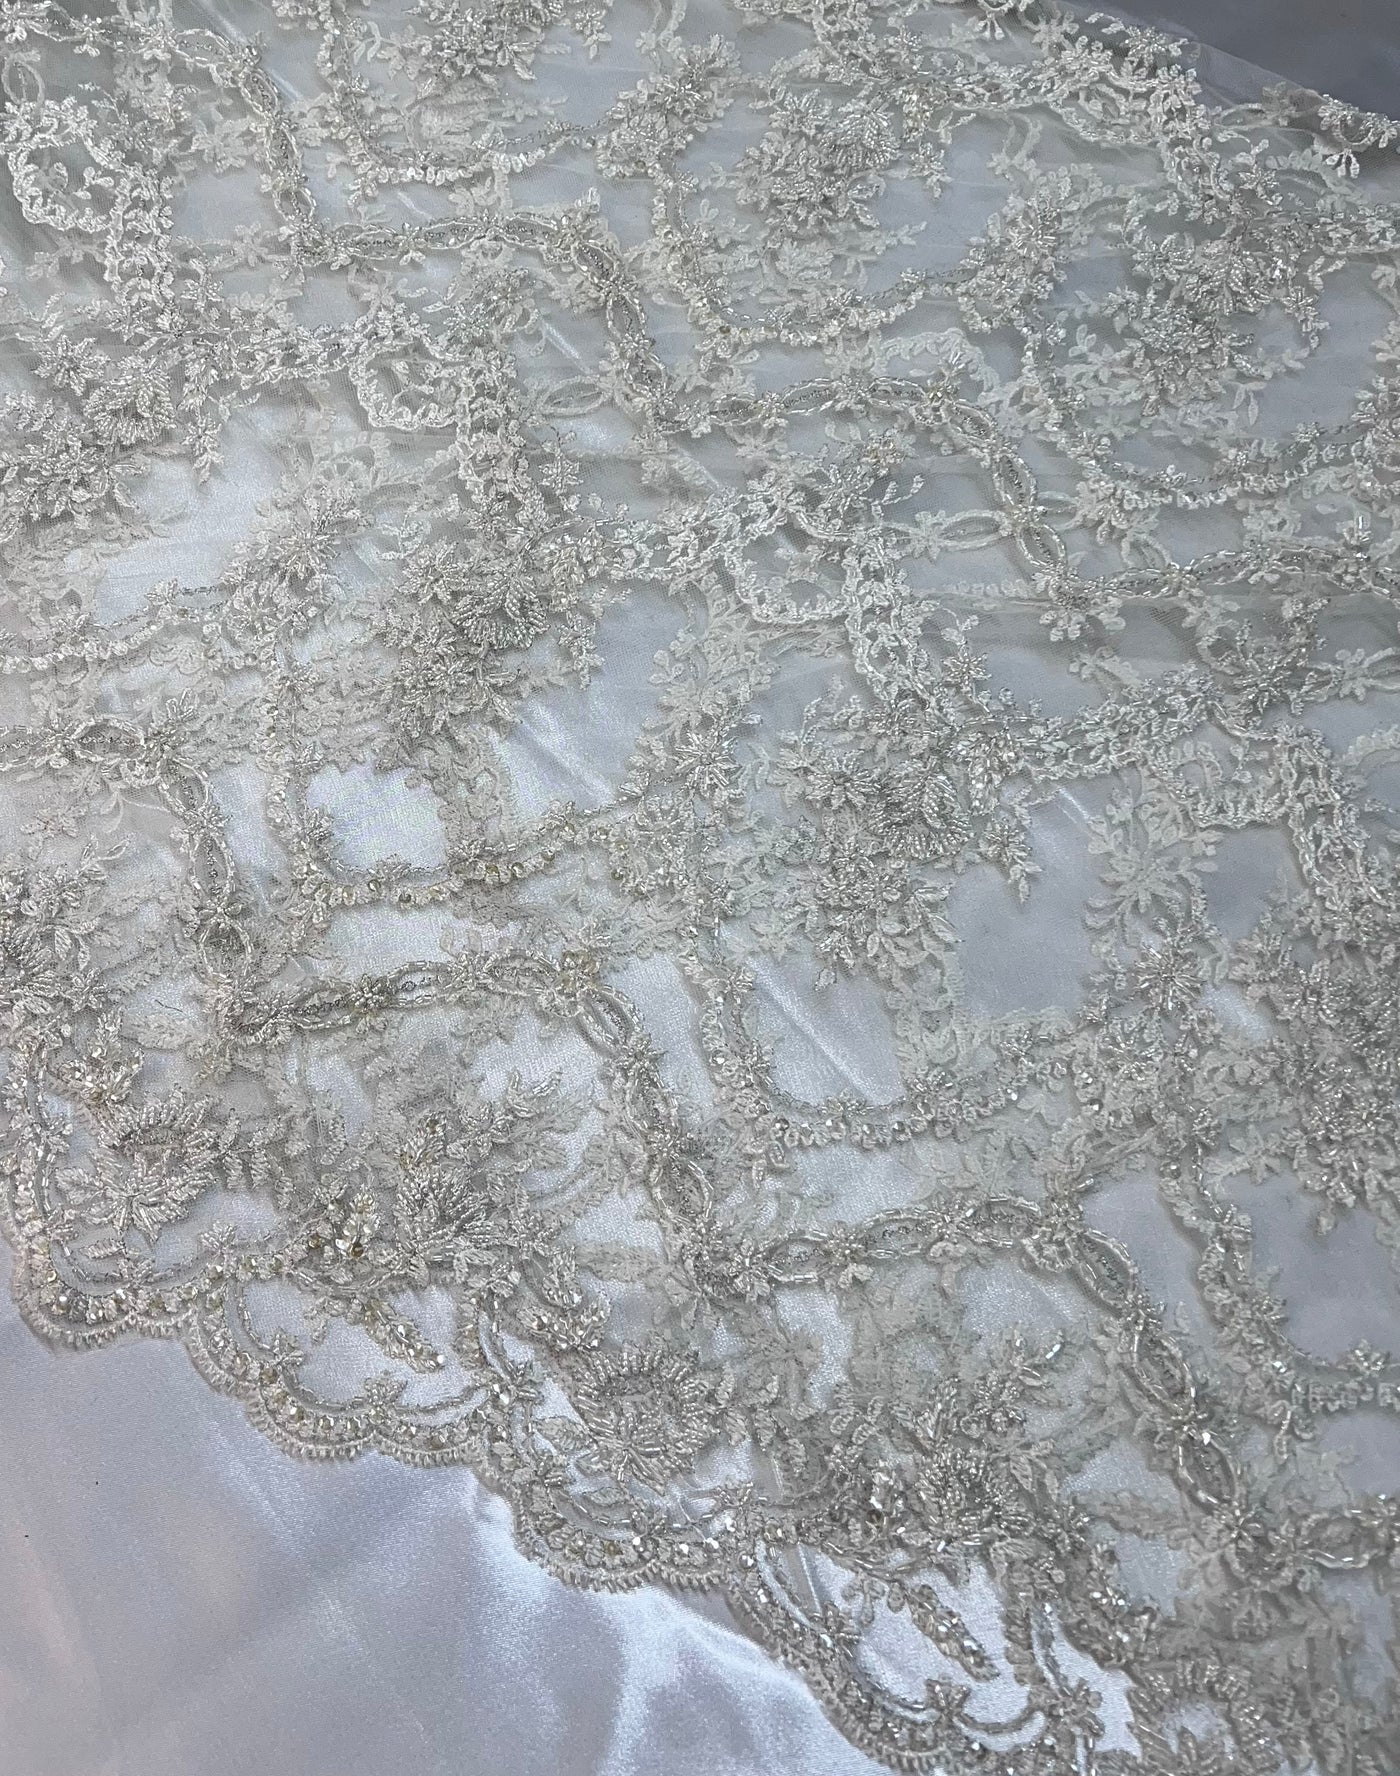 Handmade Bridal Embroidered Beaded Lace Fabric